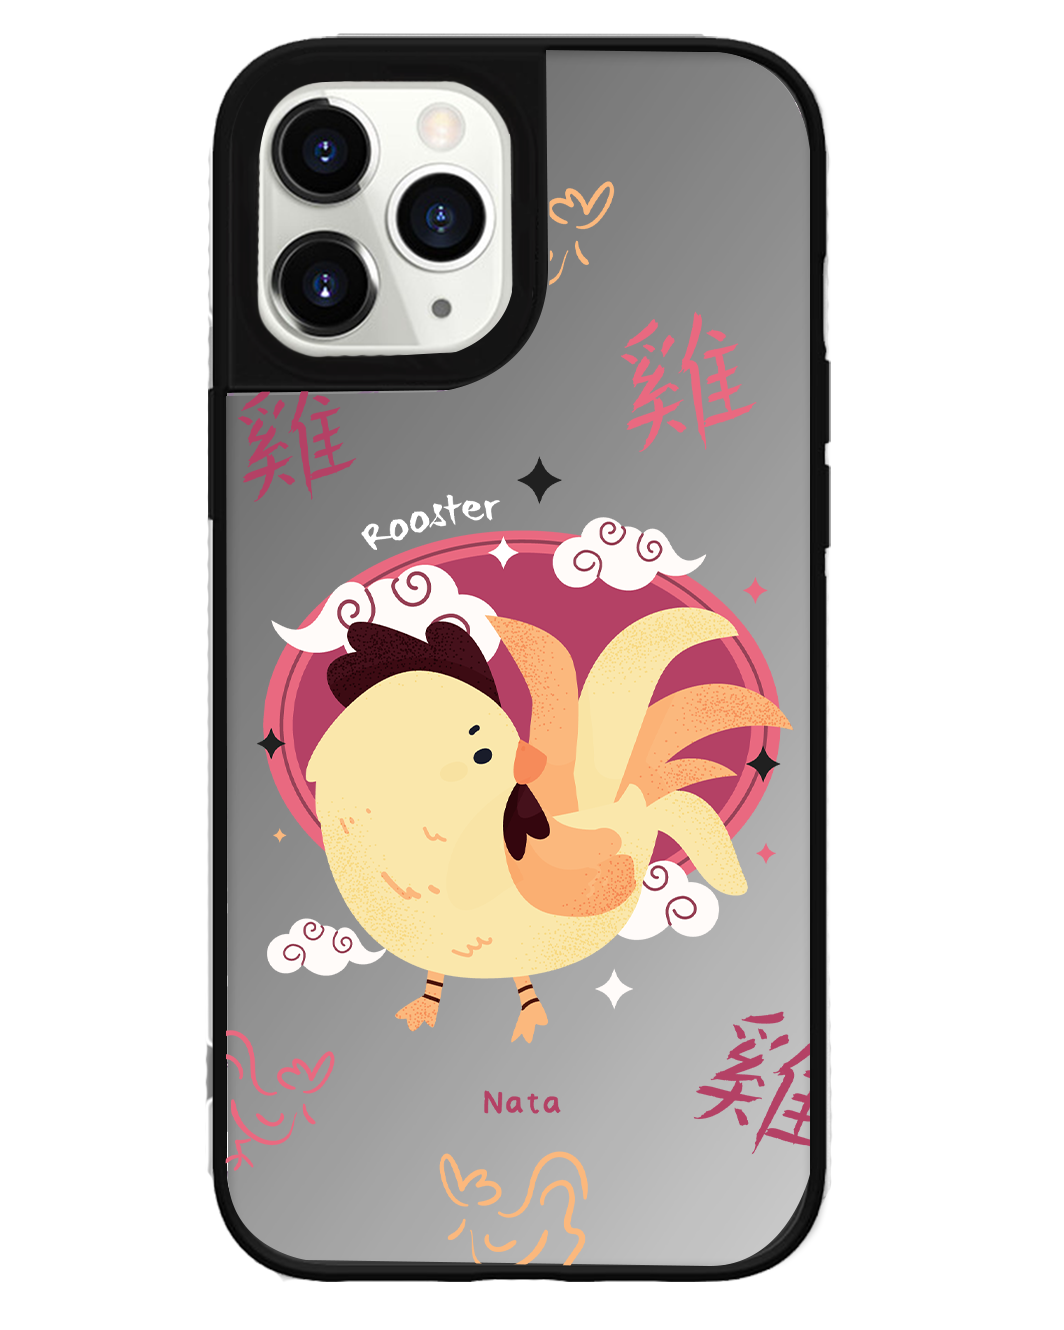 iPhone Mirror Grip Case -  Rooster (Chinese Zodiac / Shio)